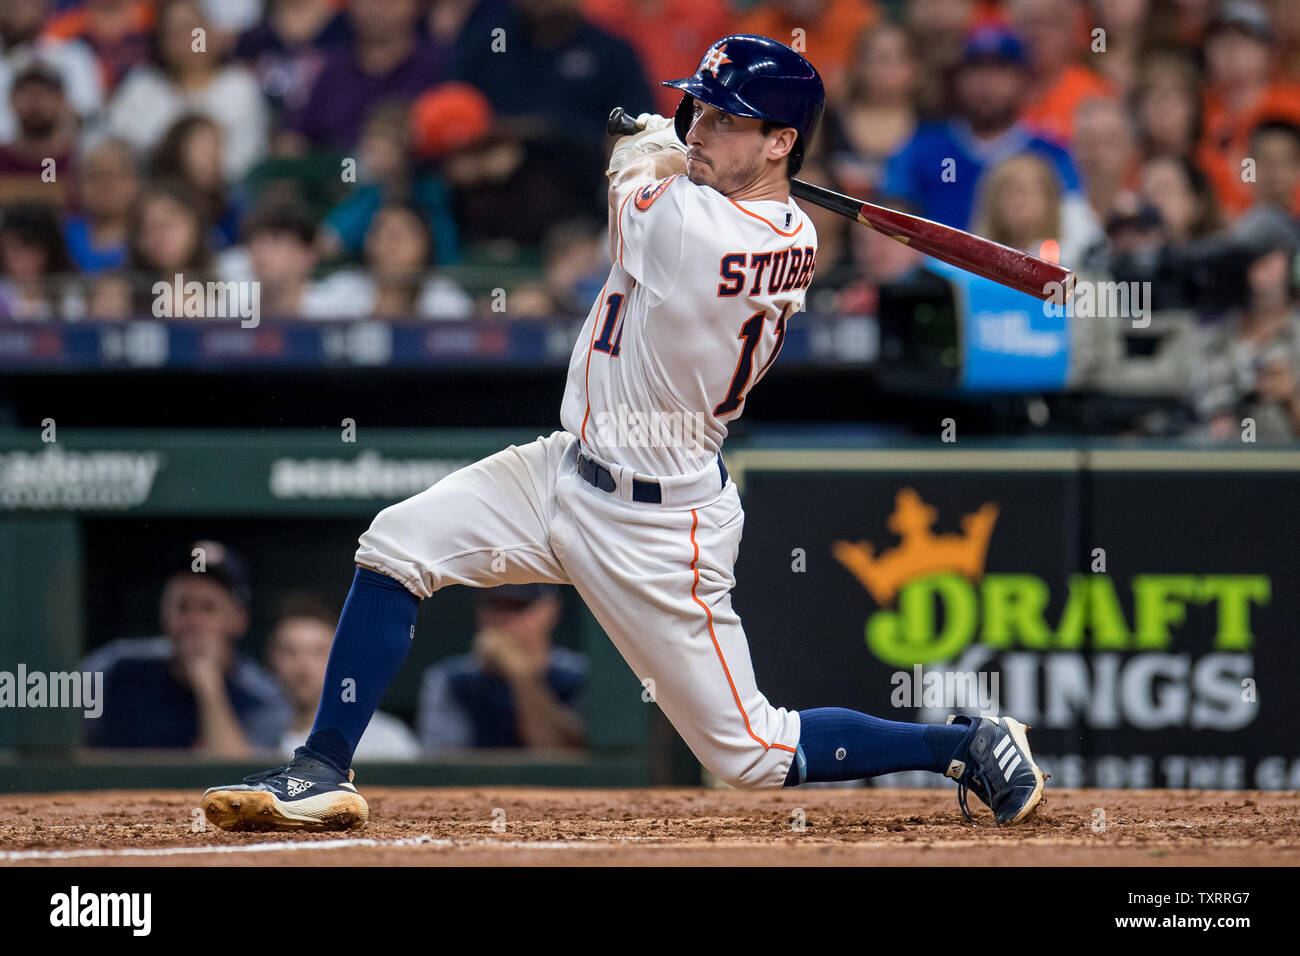 Houston Astros' Garrett Stubbs hits a double in his first major league  at-bat during a game against the Chicago Cubs in the 2nd inning at Minute  Maid Park in Houston on May